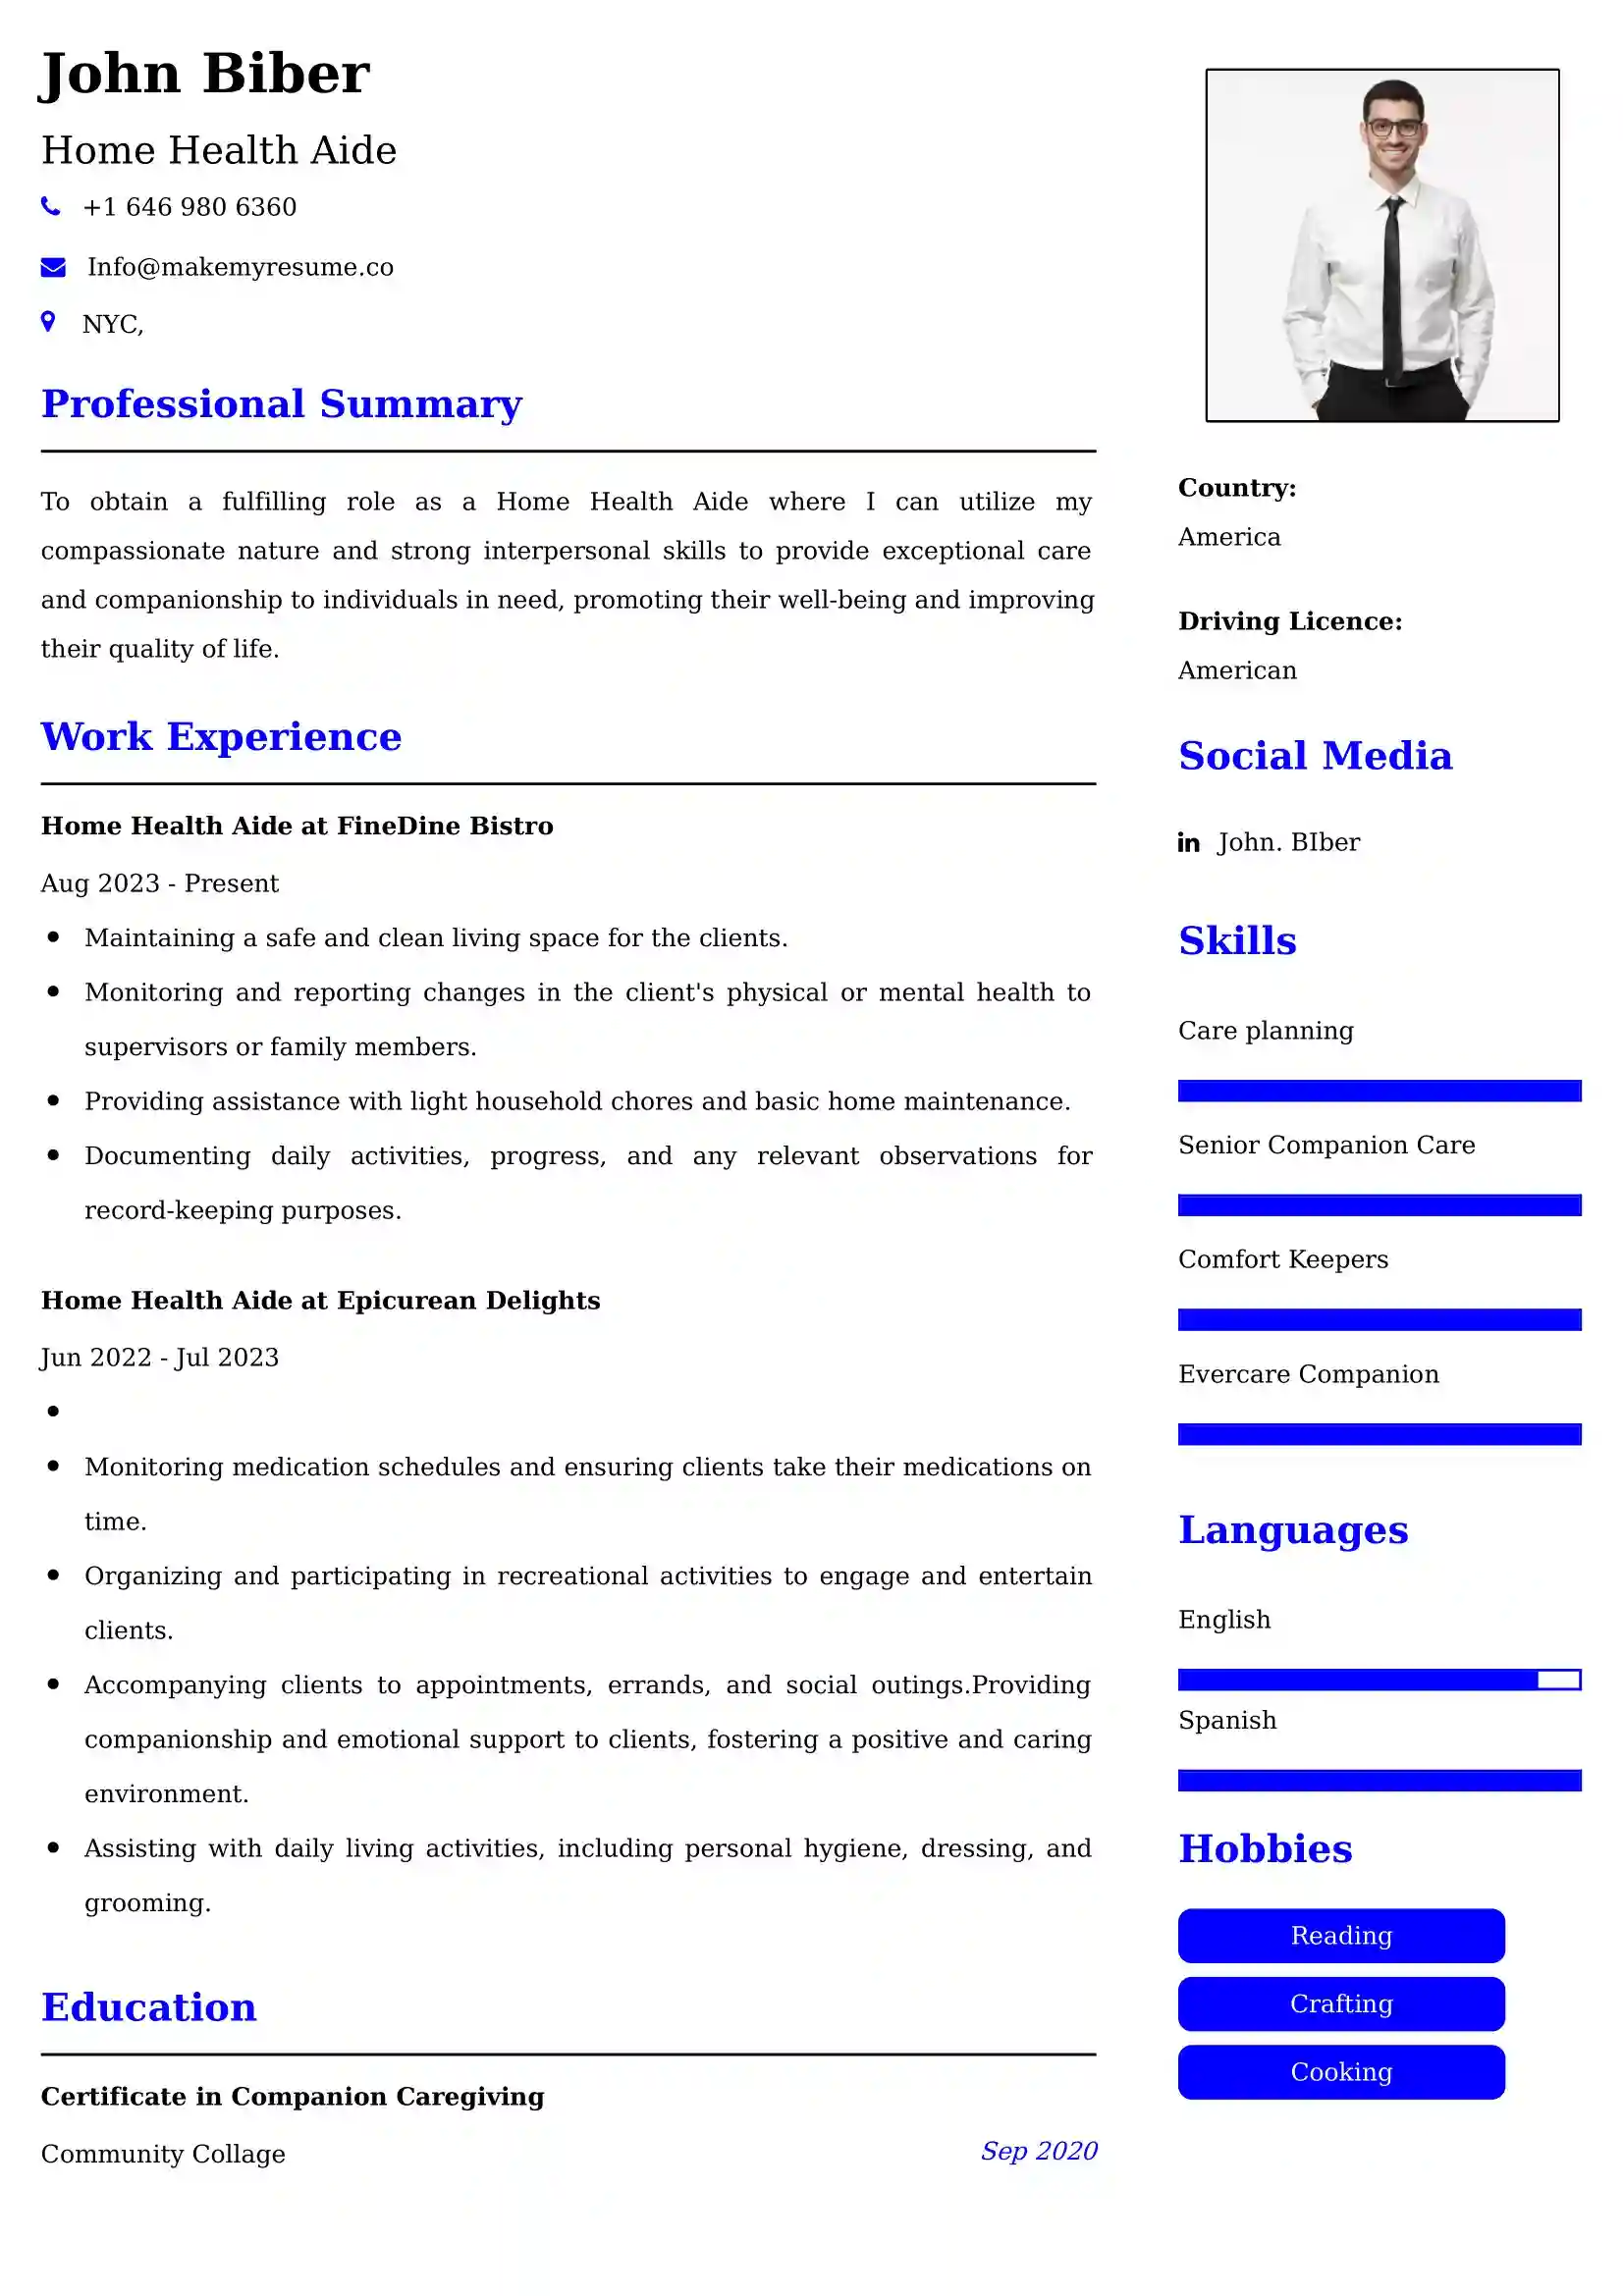 Home Health Aide Resume Examples - UK Format, Latest Template.